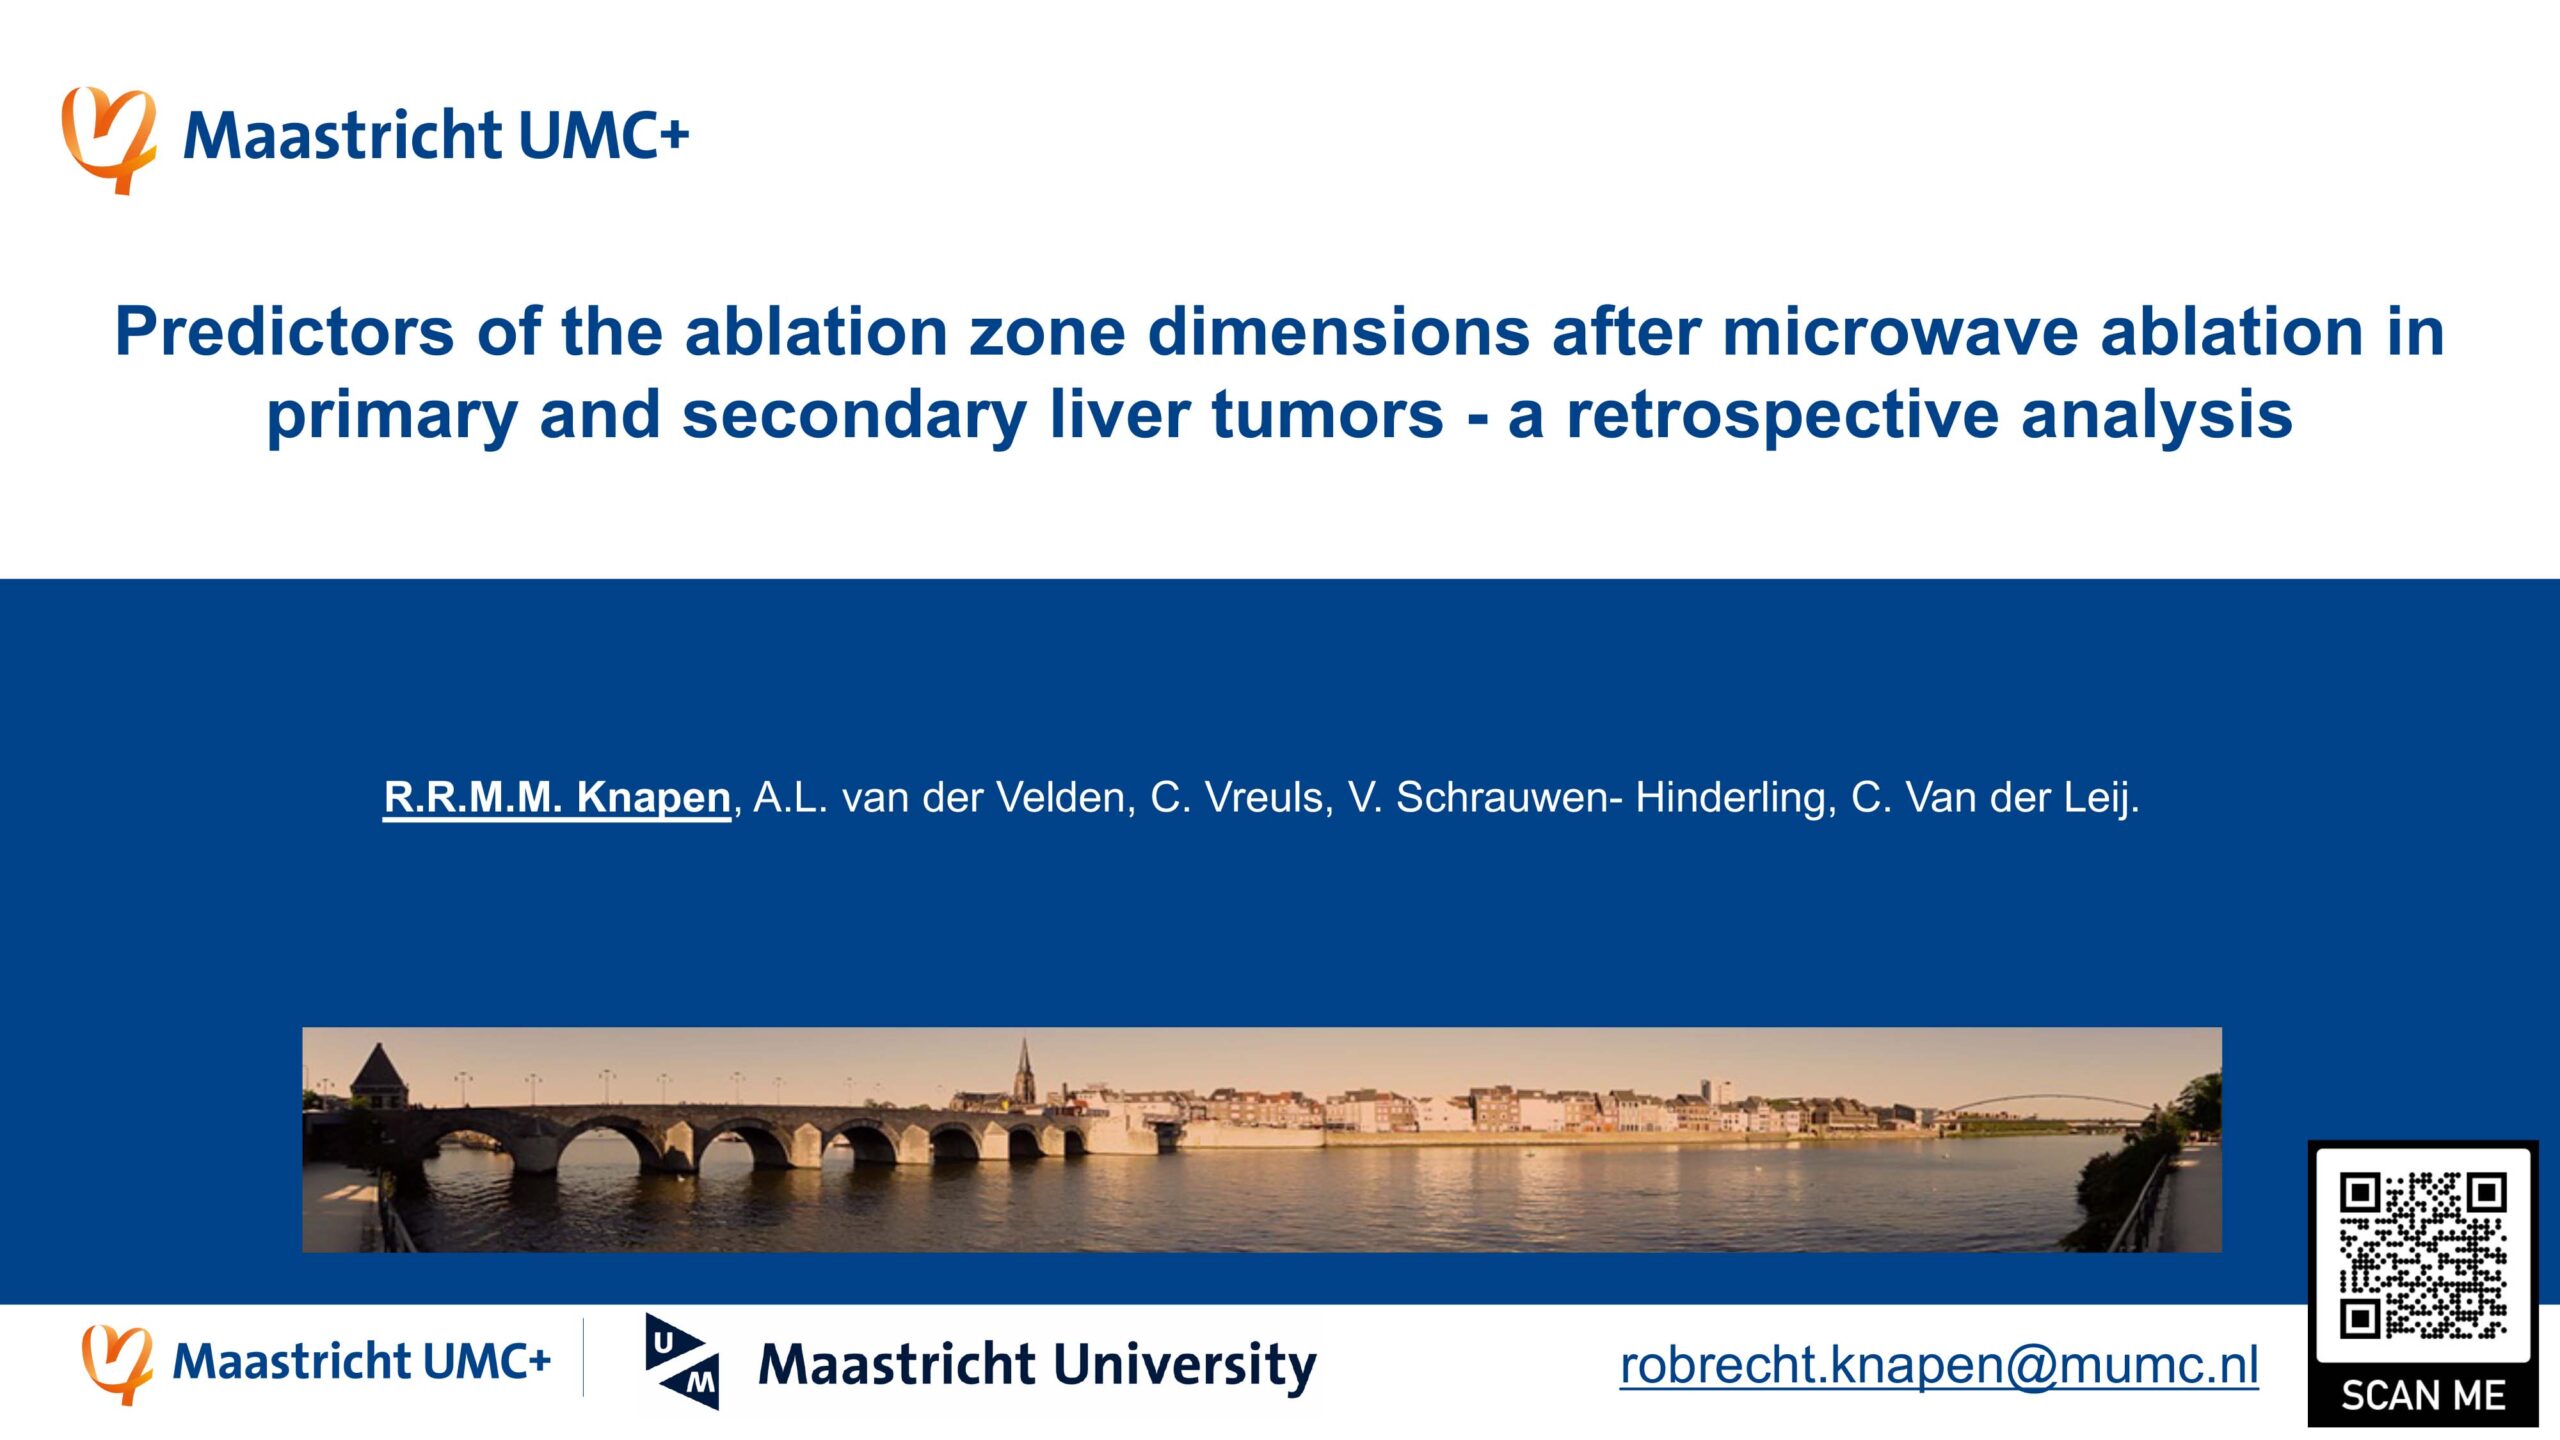 Predictors of the Size of the Microwave Ablation Zone after In Patients with Primary and Secondary Liver Tumors; A Retrospective Analysis